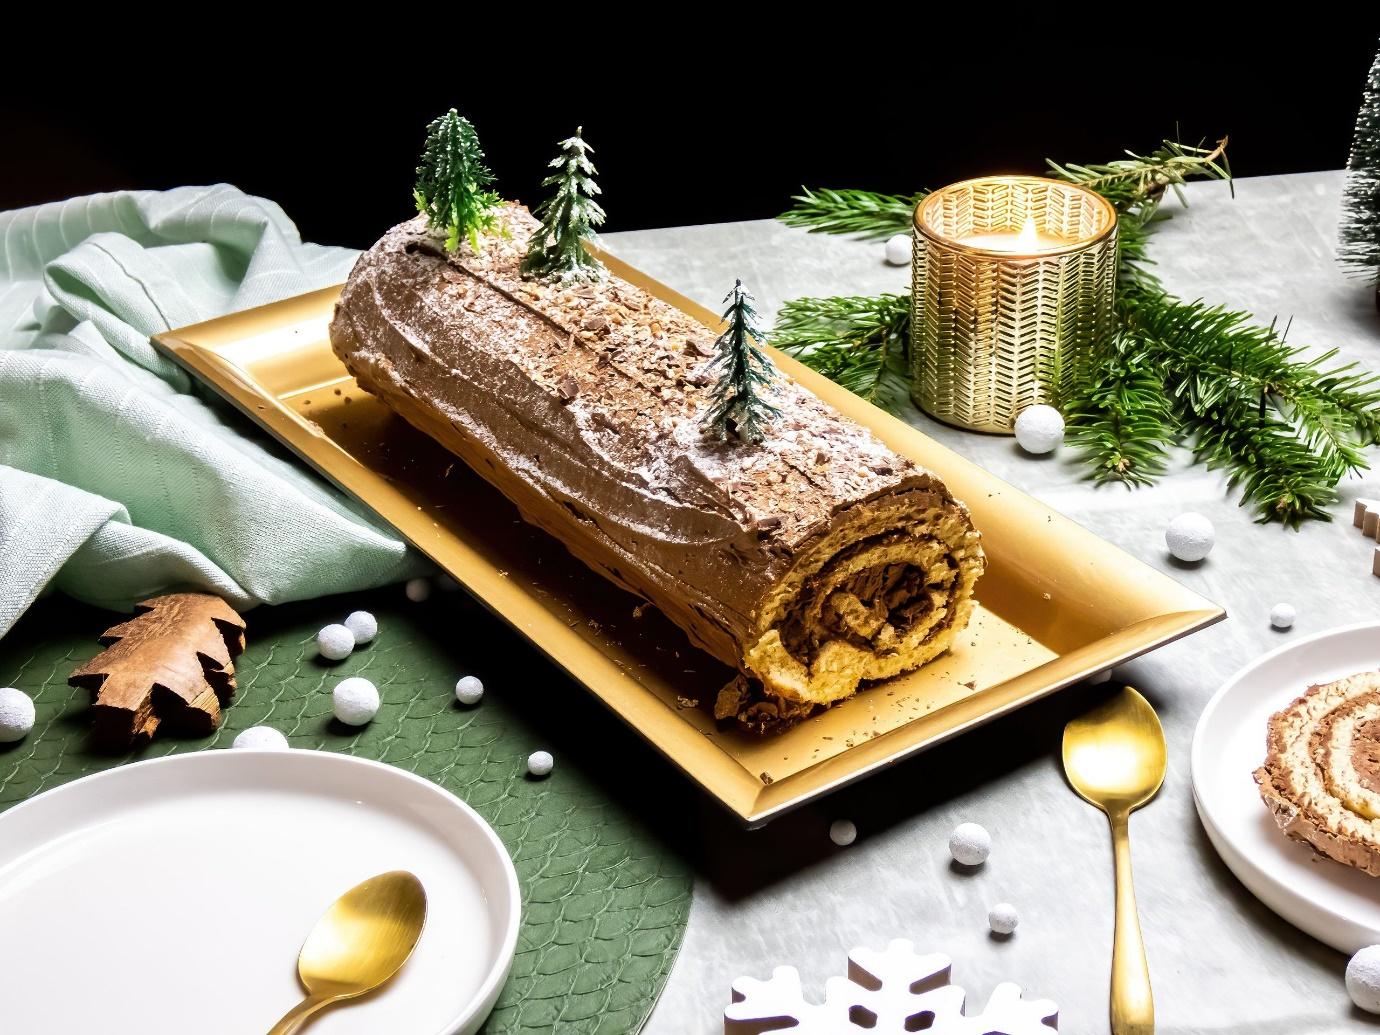 The iconic Bûche de Noël with three miniature Spruce trees on top | Wedifys